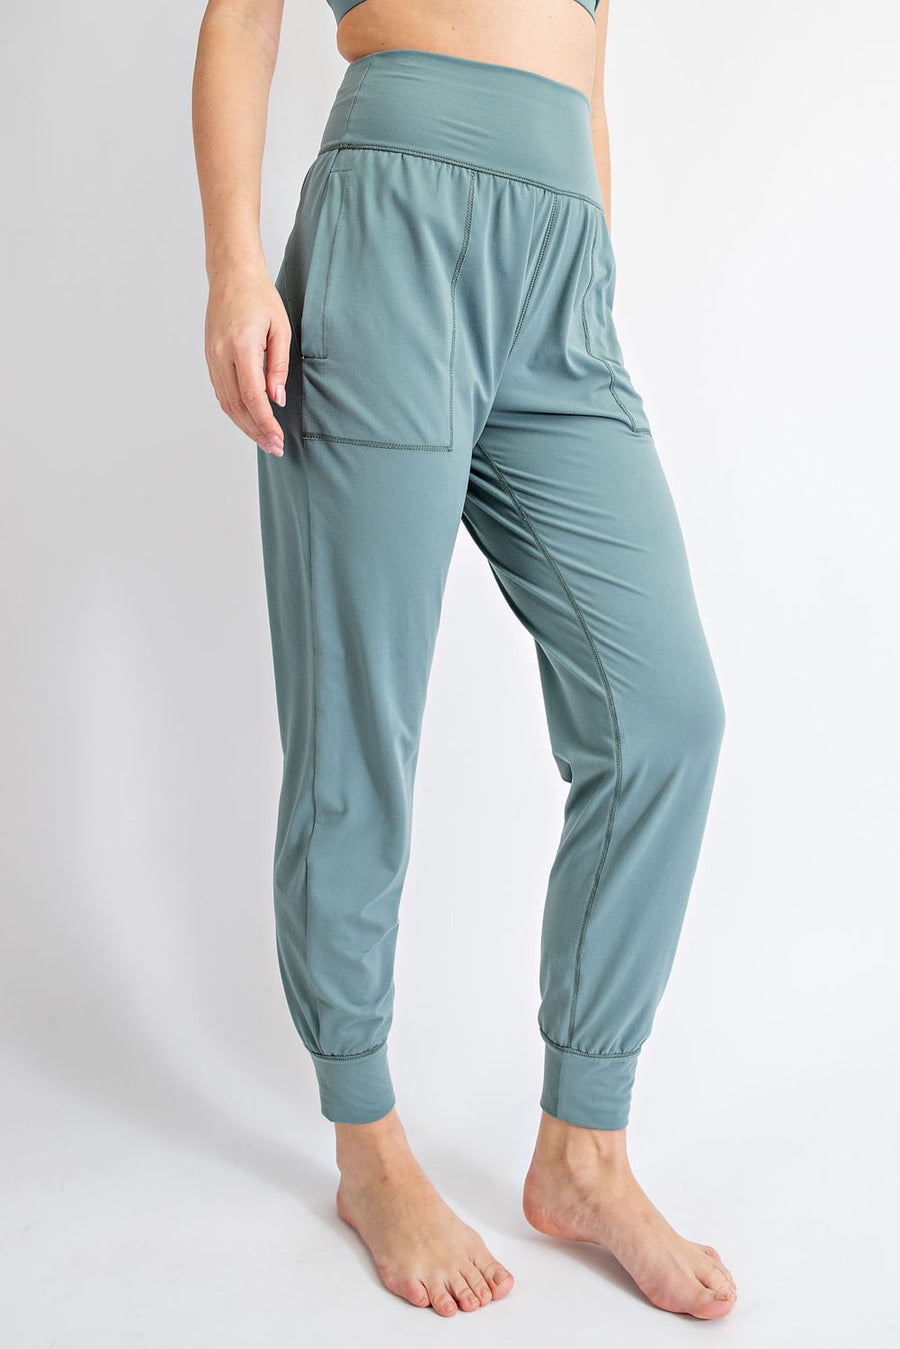 Terri | Butter Soft Joggers with Pockets | Tidewater Teal